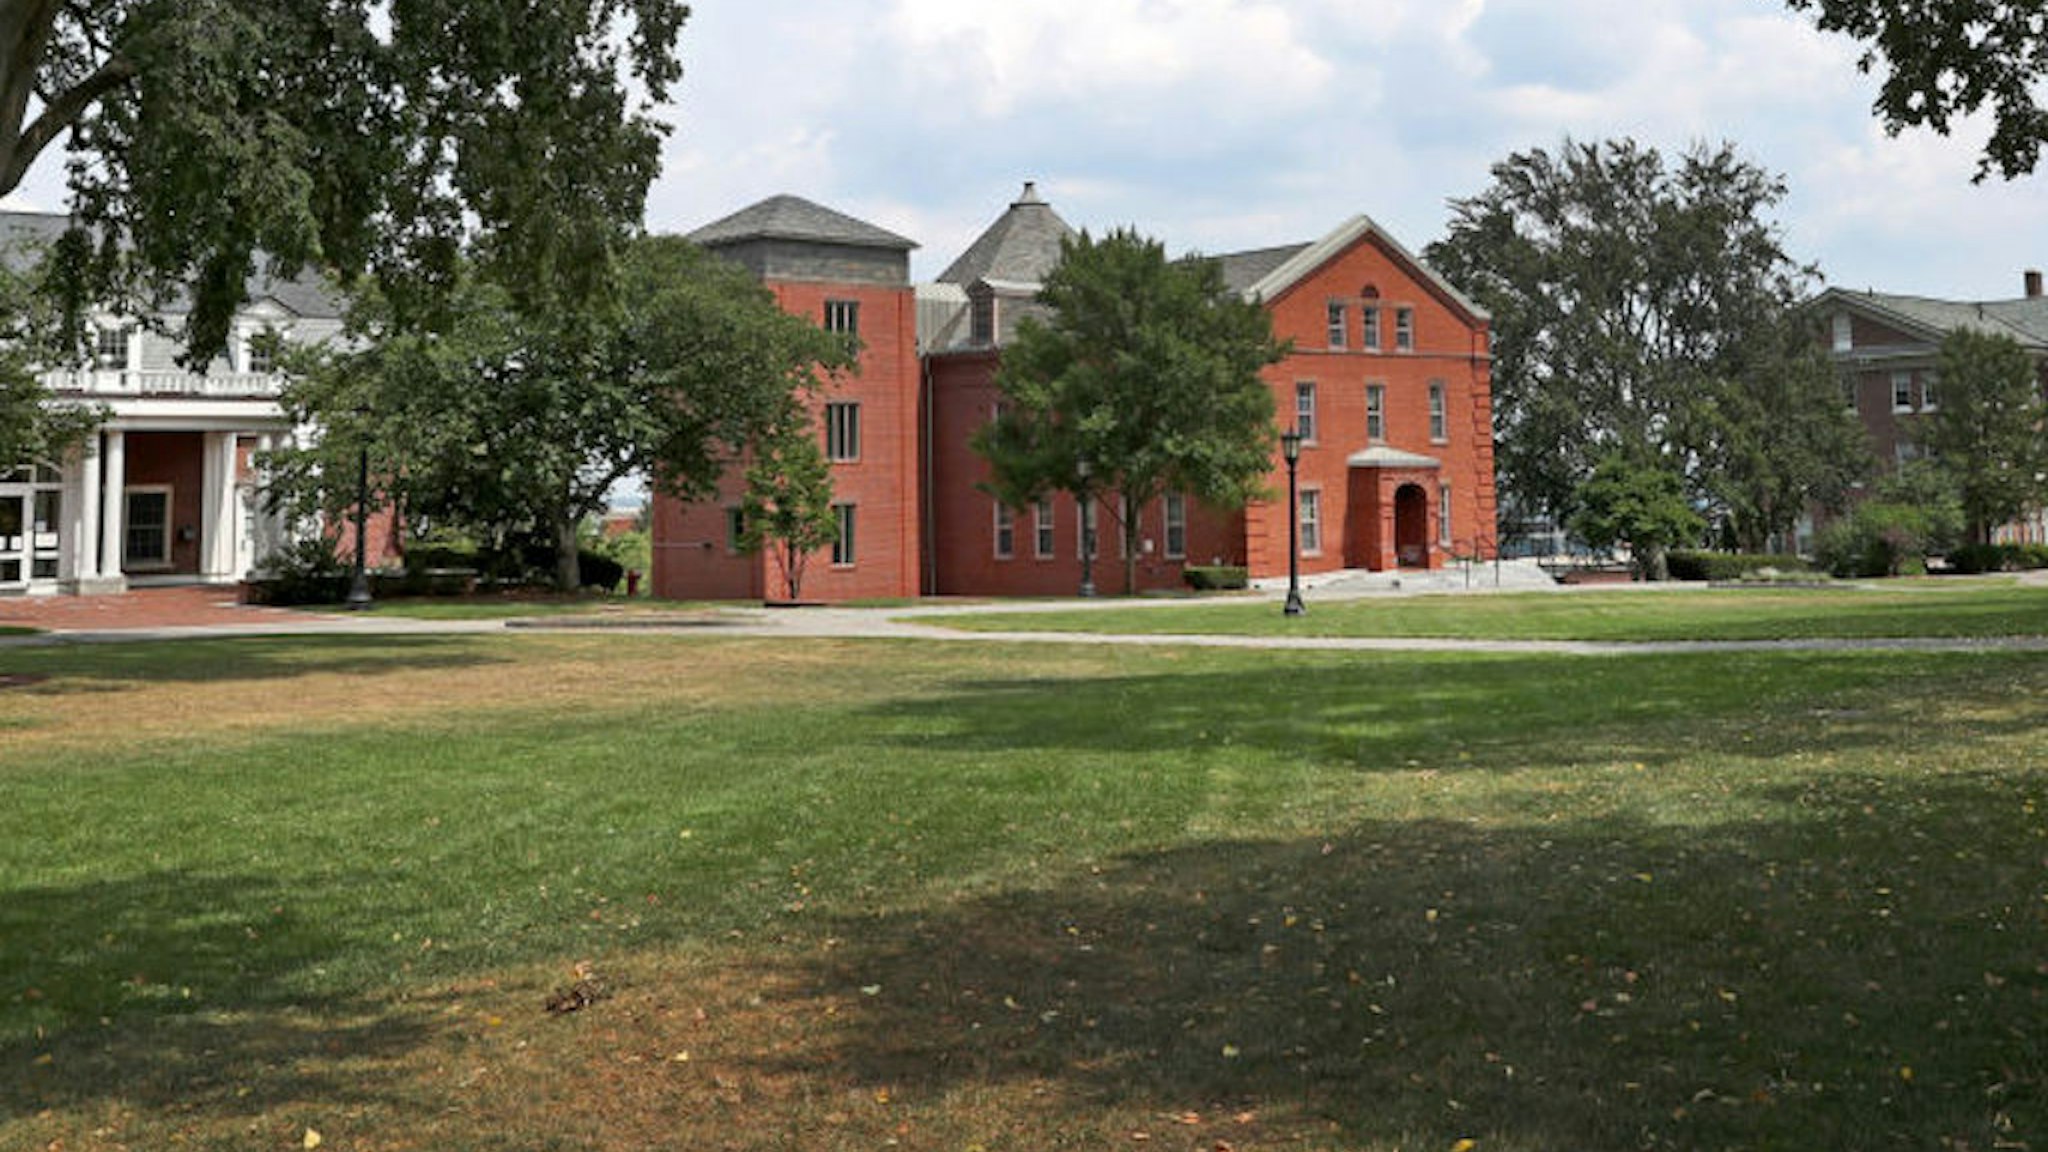 Tufts University campus grounds in Medford, MA are pictured on Aug. 11, 2020.